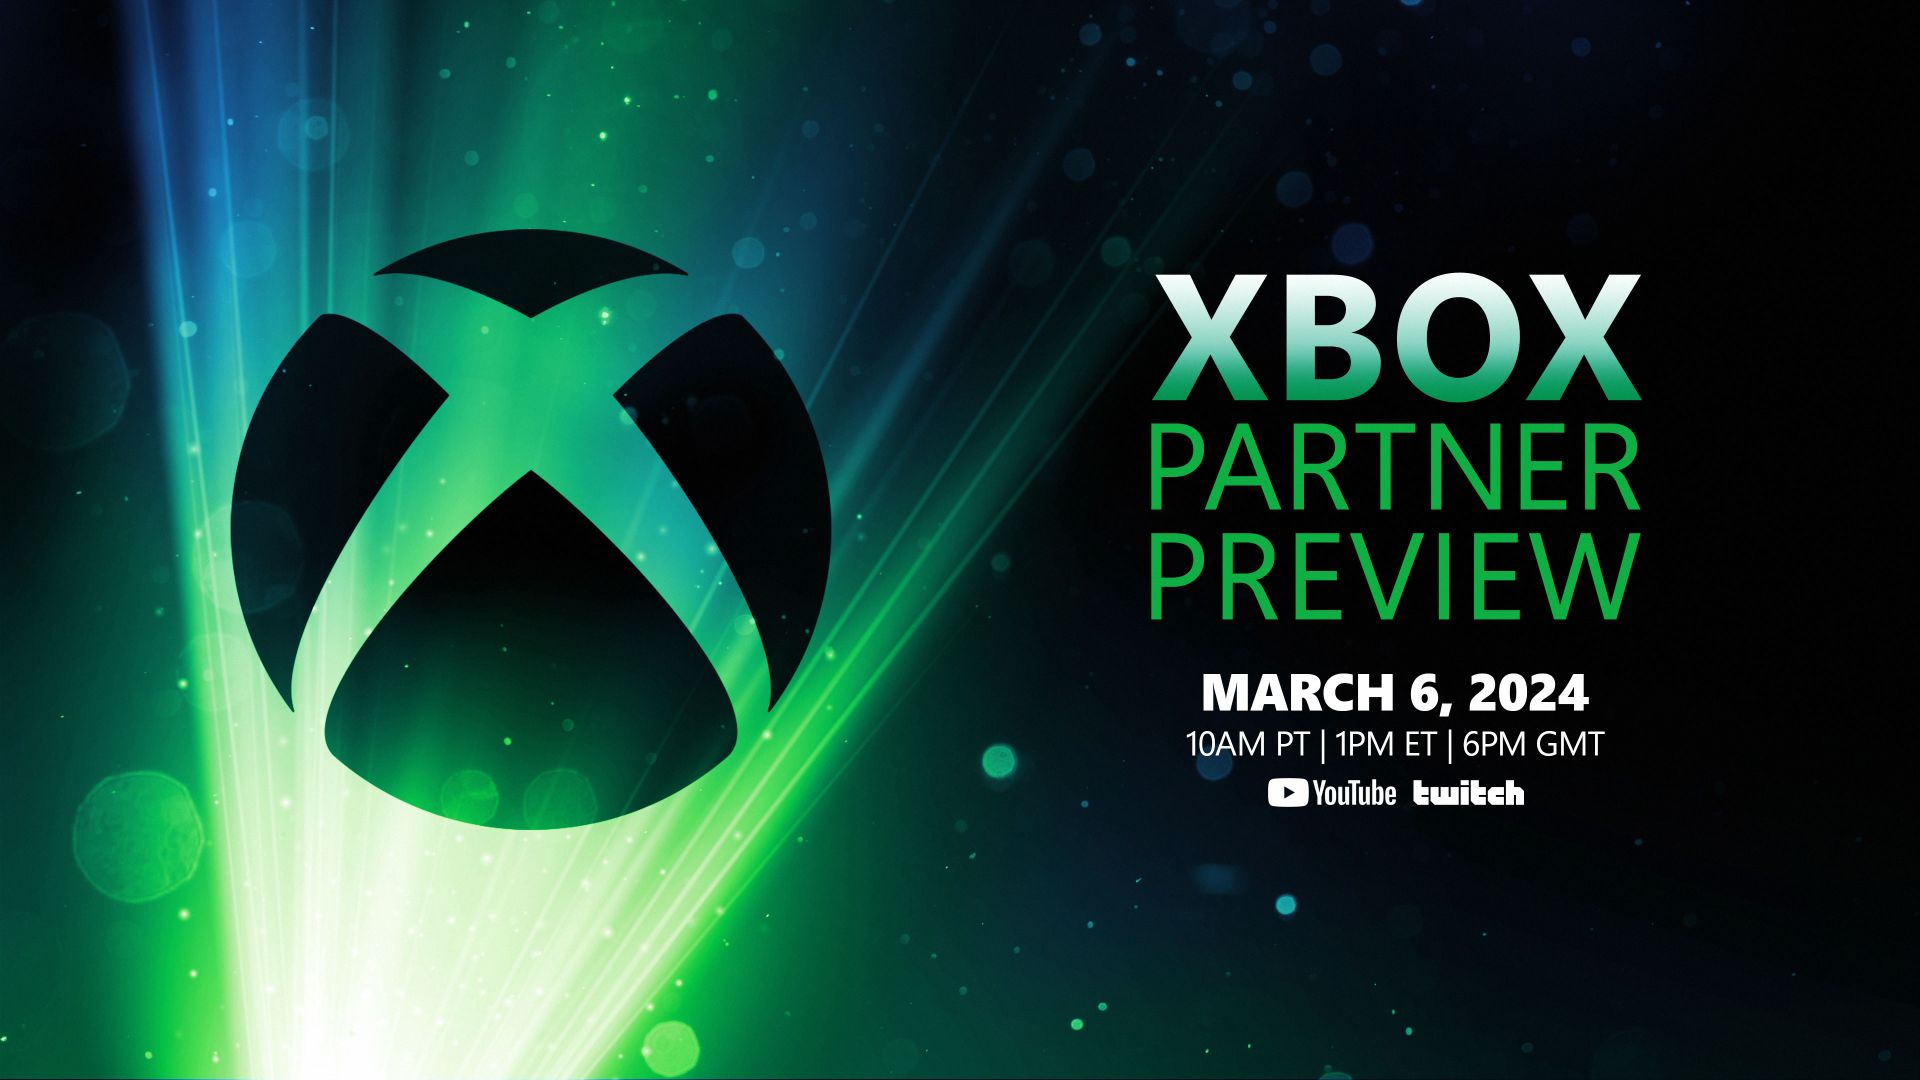 Xbox Partner Preview announced for March 6 (30 minutes long) ResetEra